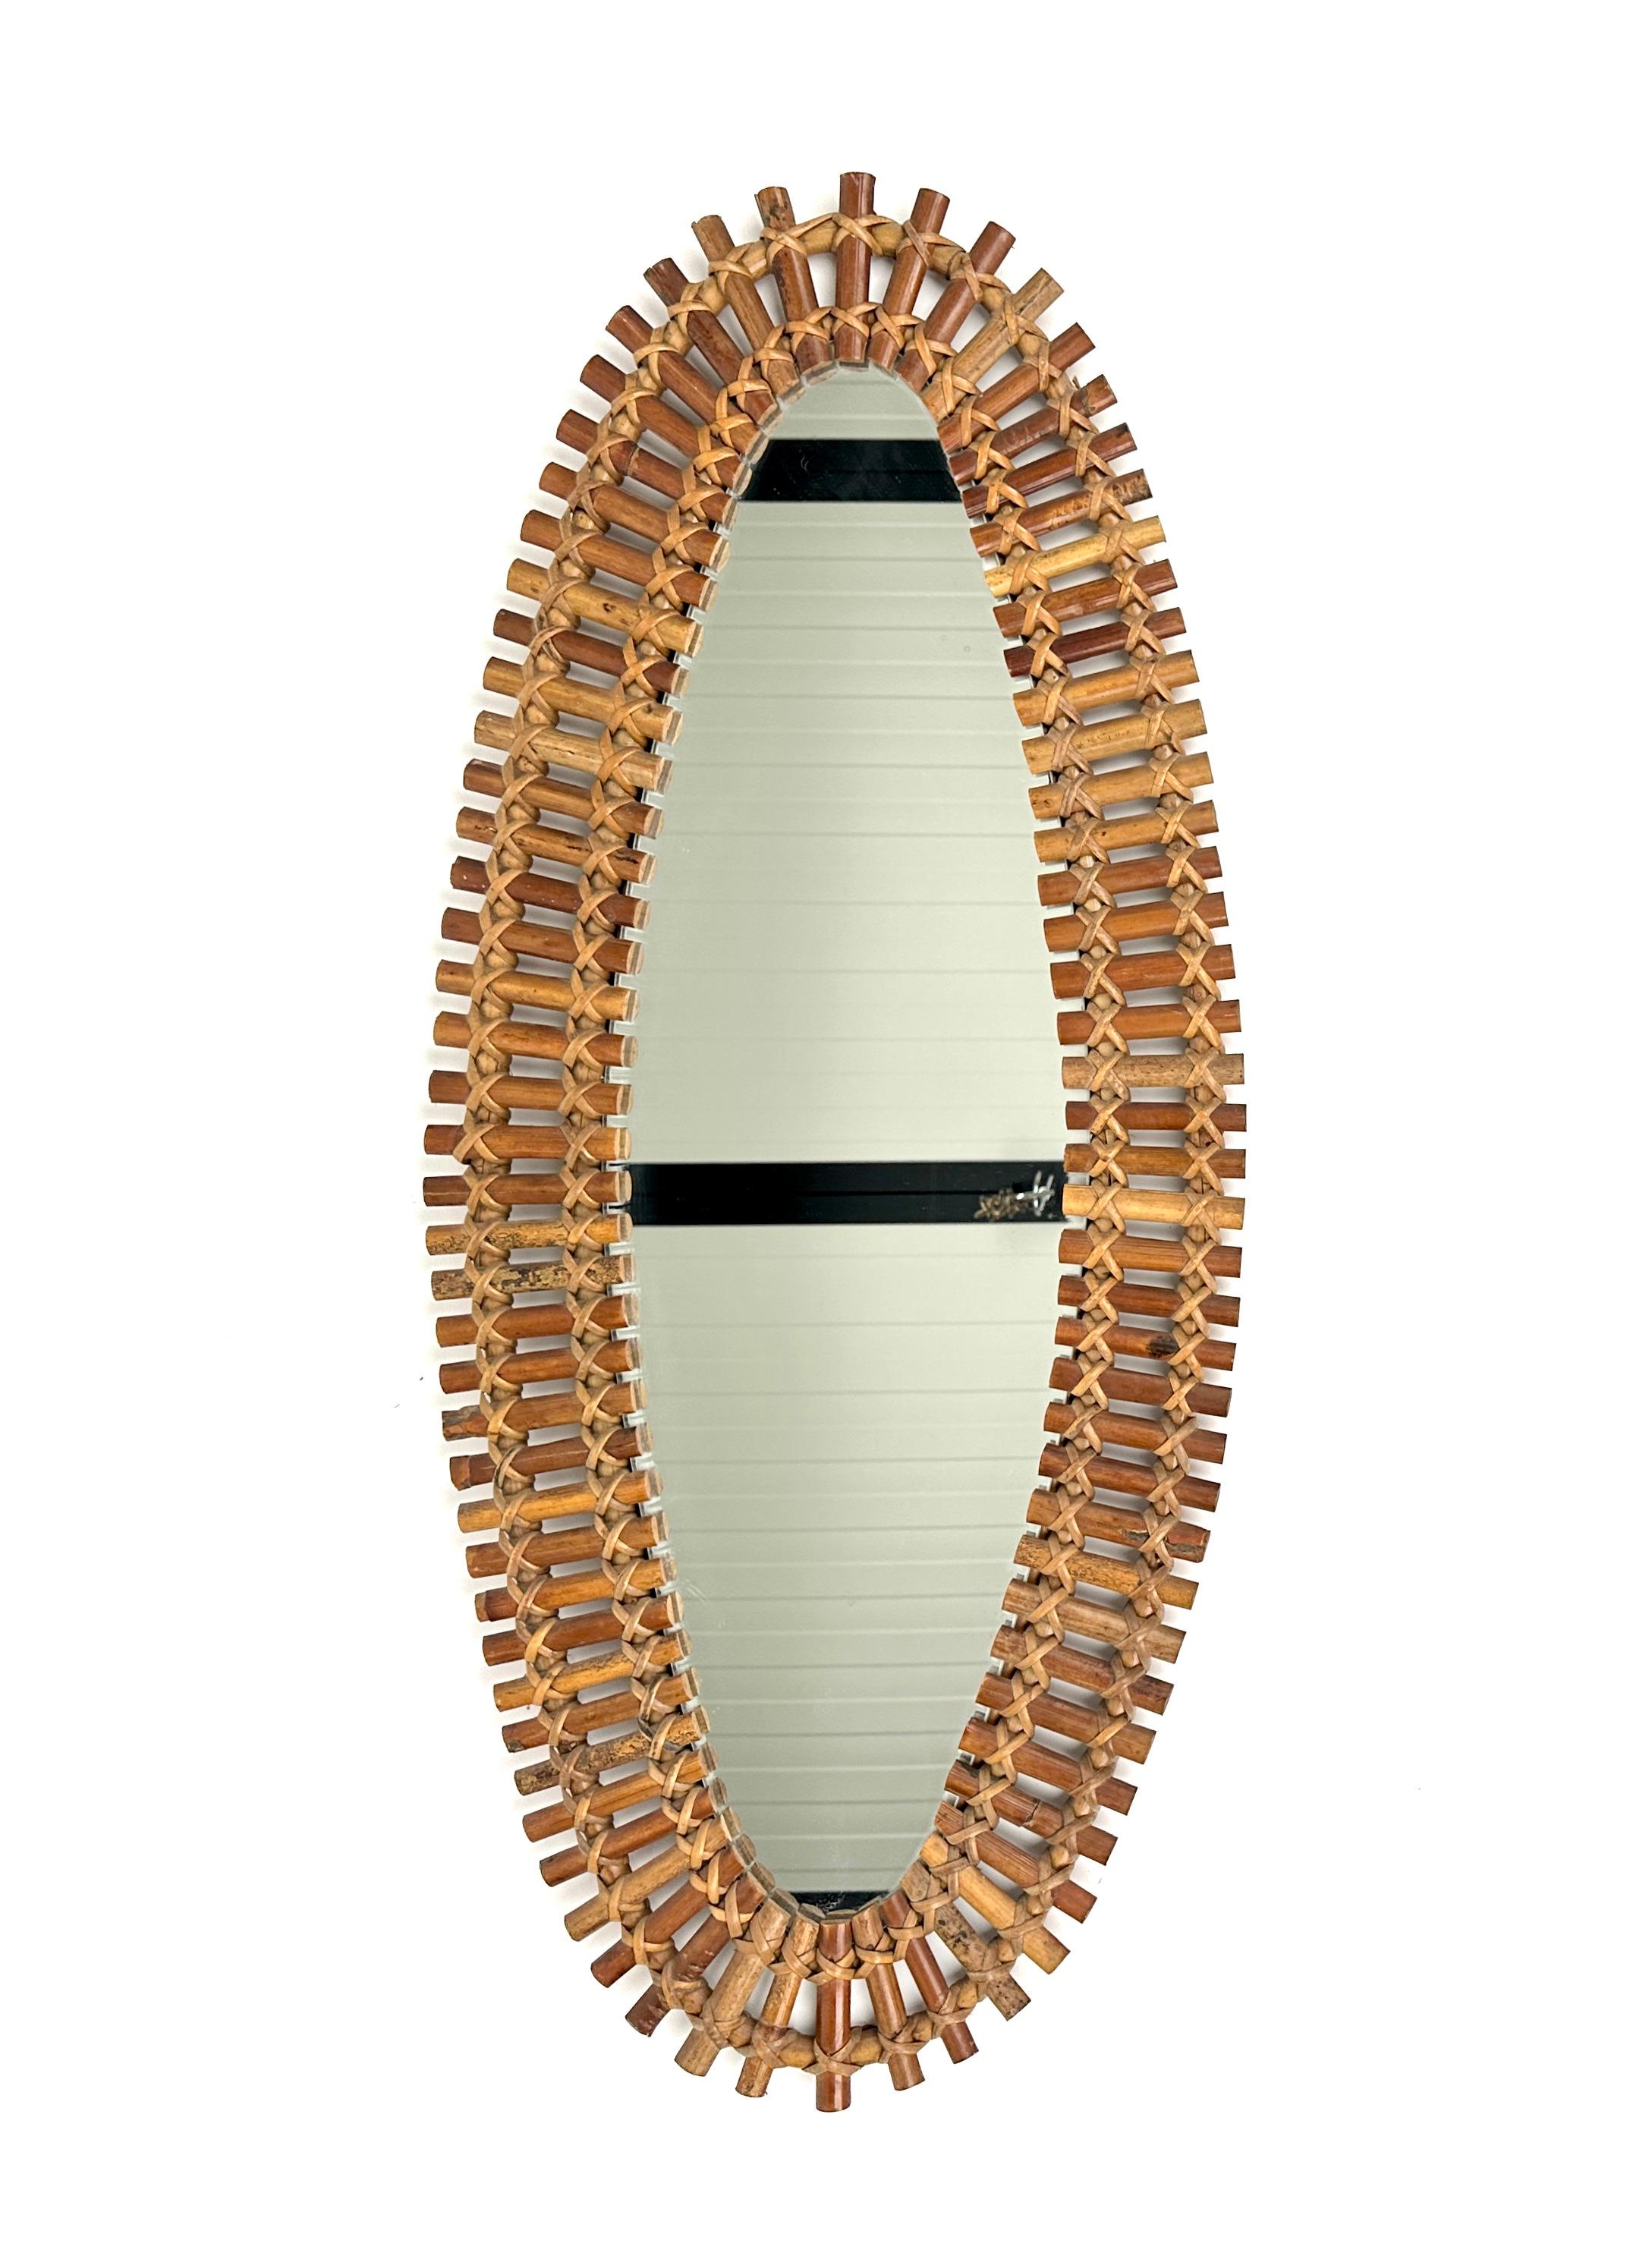 Beautiful oval wall mirror in bamboo and rattan.

Made in Italy in the 1960s.